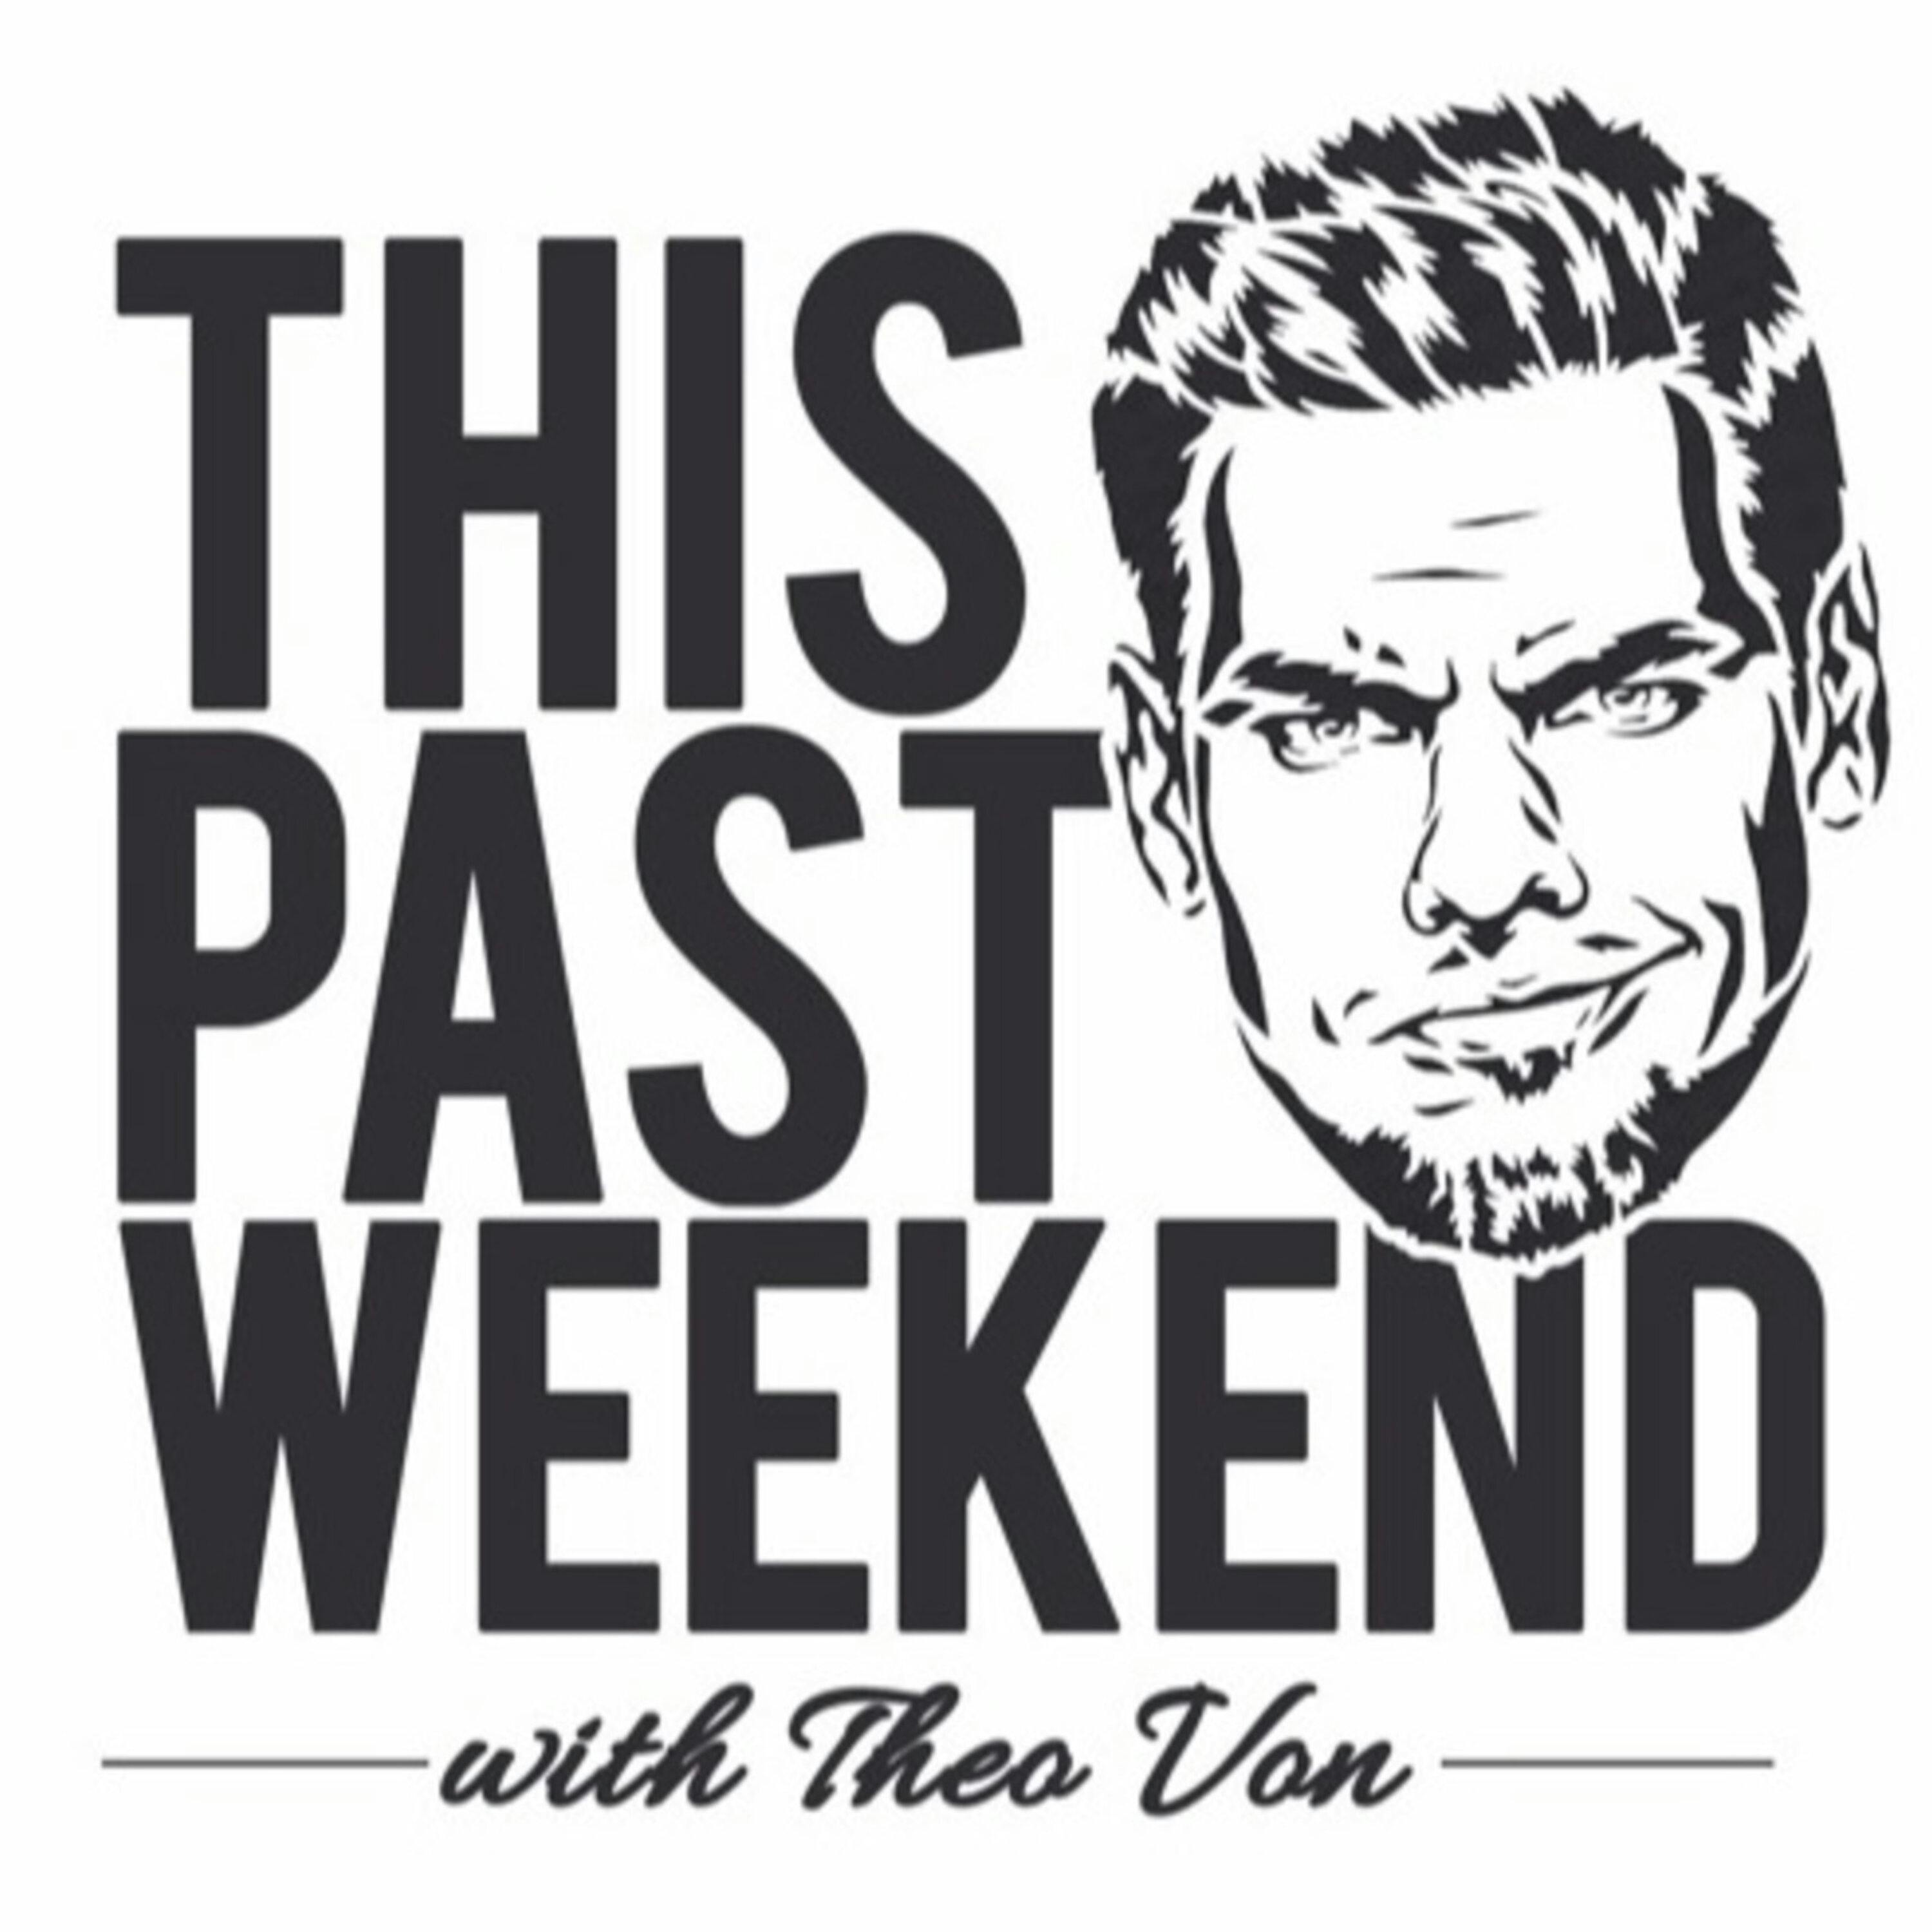 8-28-17 | This Past Weekend #39 by Theo Von